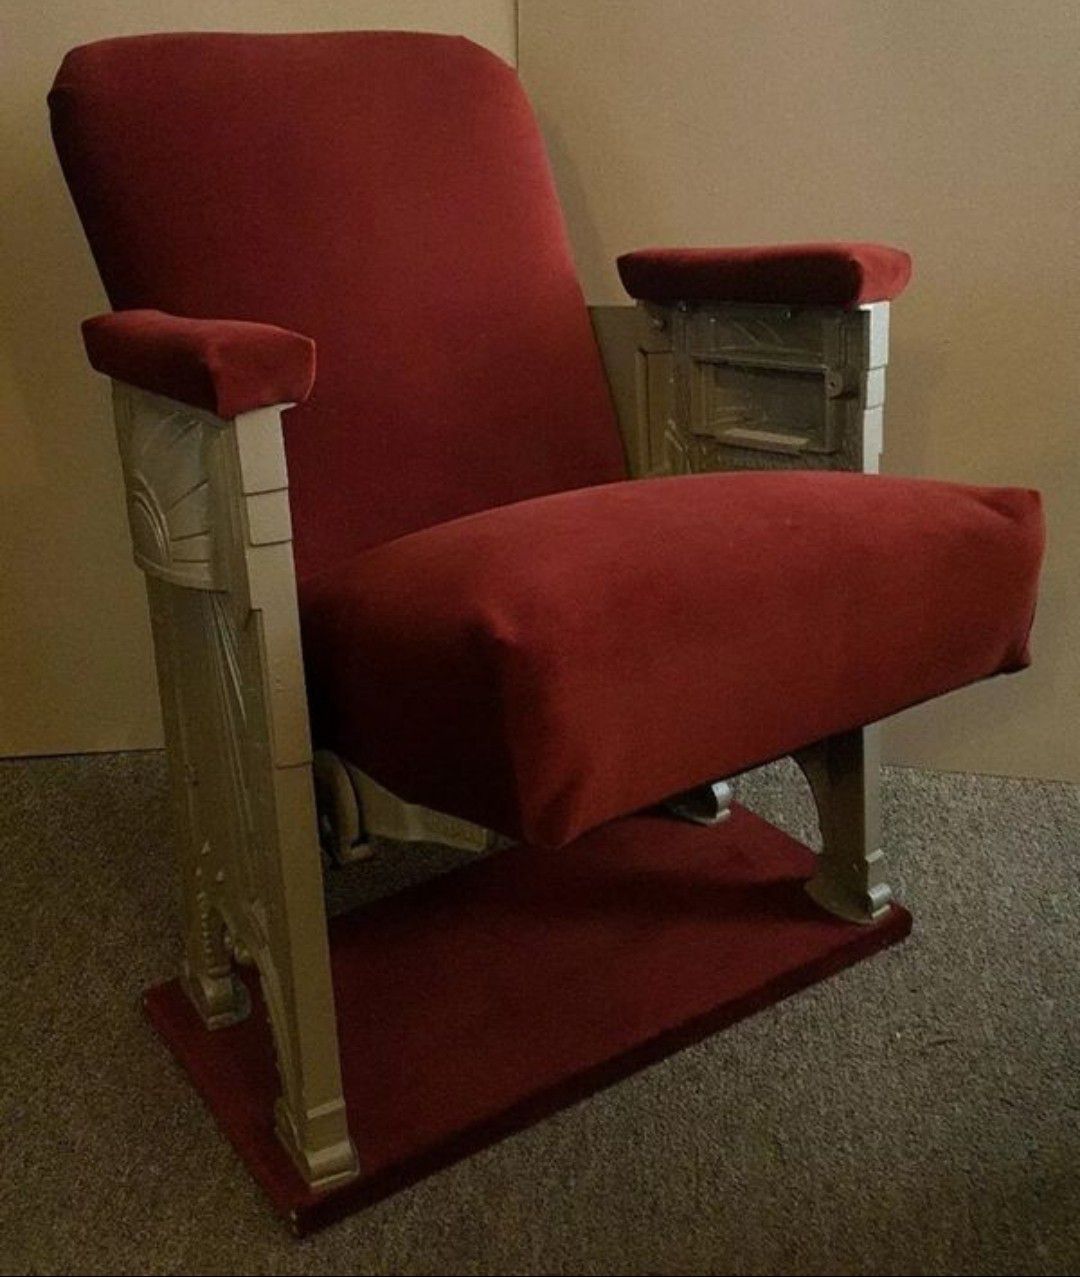 Antique 1929 American Seating Company Art Deco Theater Seat Single Chair